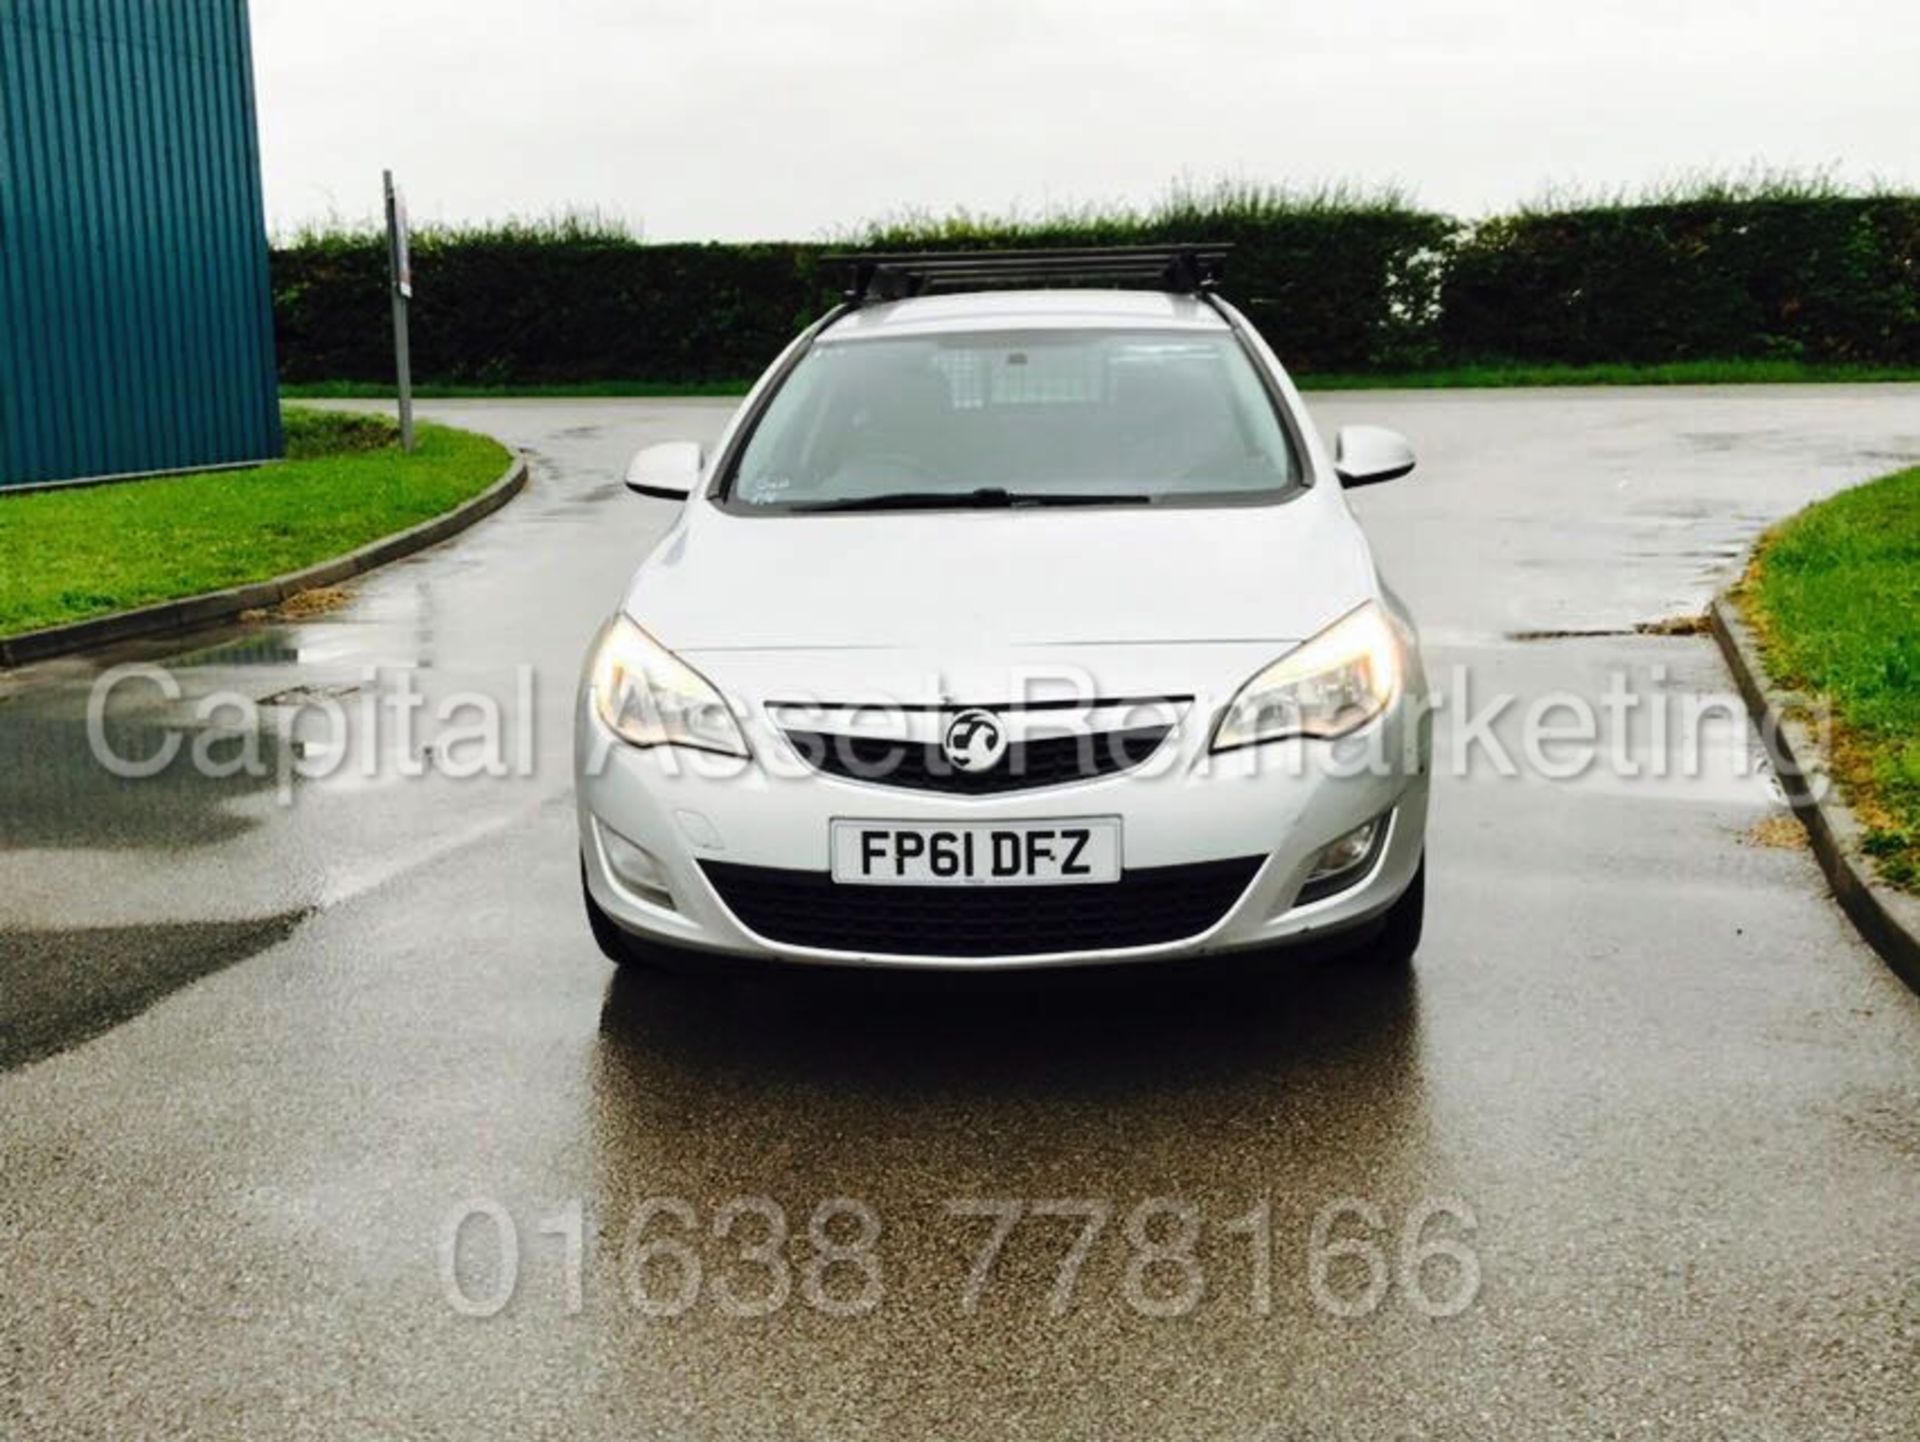 (On Sale) VAUXHALL ASTRA 'EXCLUSIVE' (2012 MODEL) '1.7 CDTI - ECOFLEX - 6 SPEED' *AIR CON* (1 OWNER) - Image 2 of 17